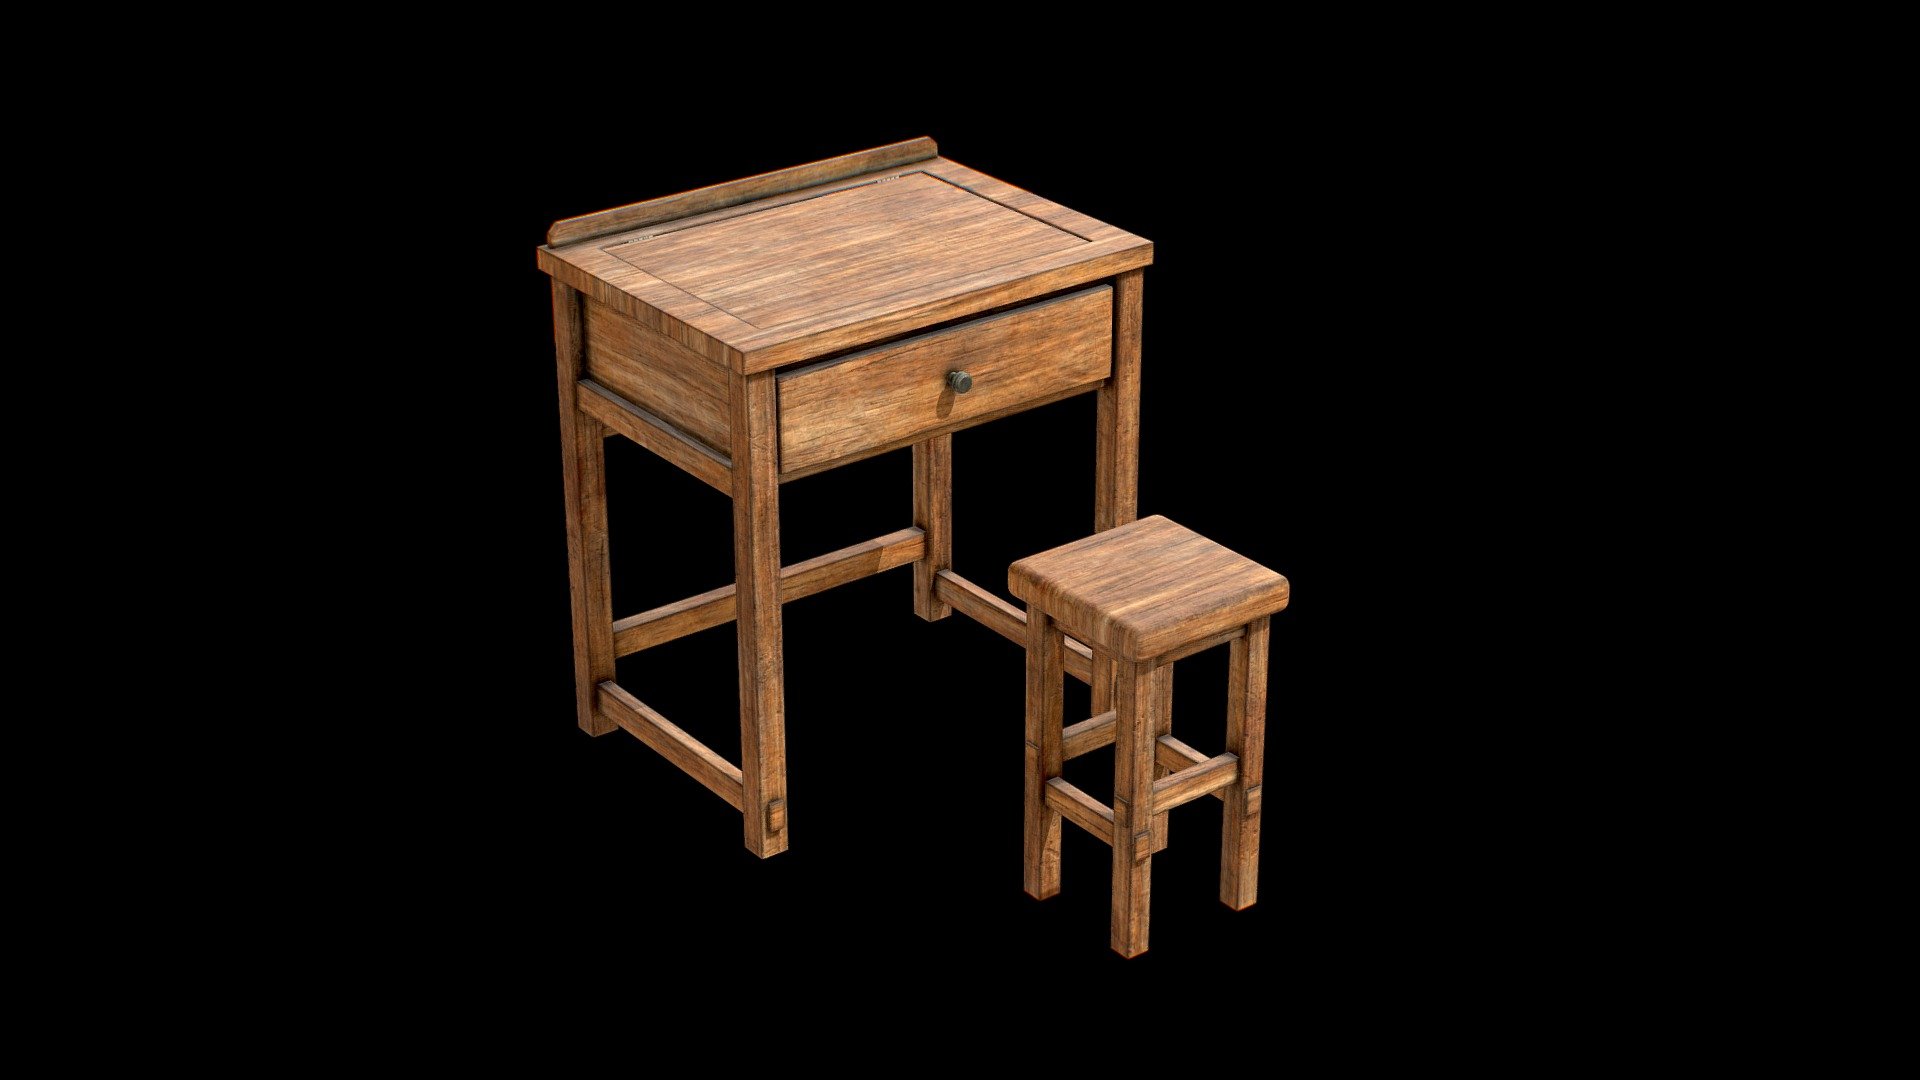 Free download：www.freepoly.org - Table And Chair Combination-Freepoly.org - Download Free 3D model by Freepoly.org (@blackrray) 3d model